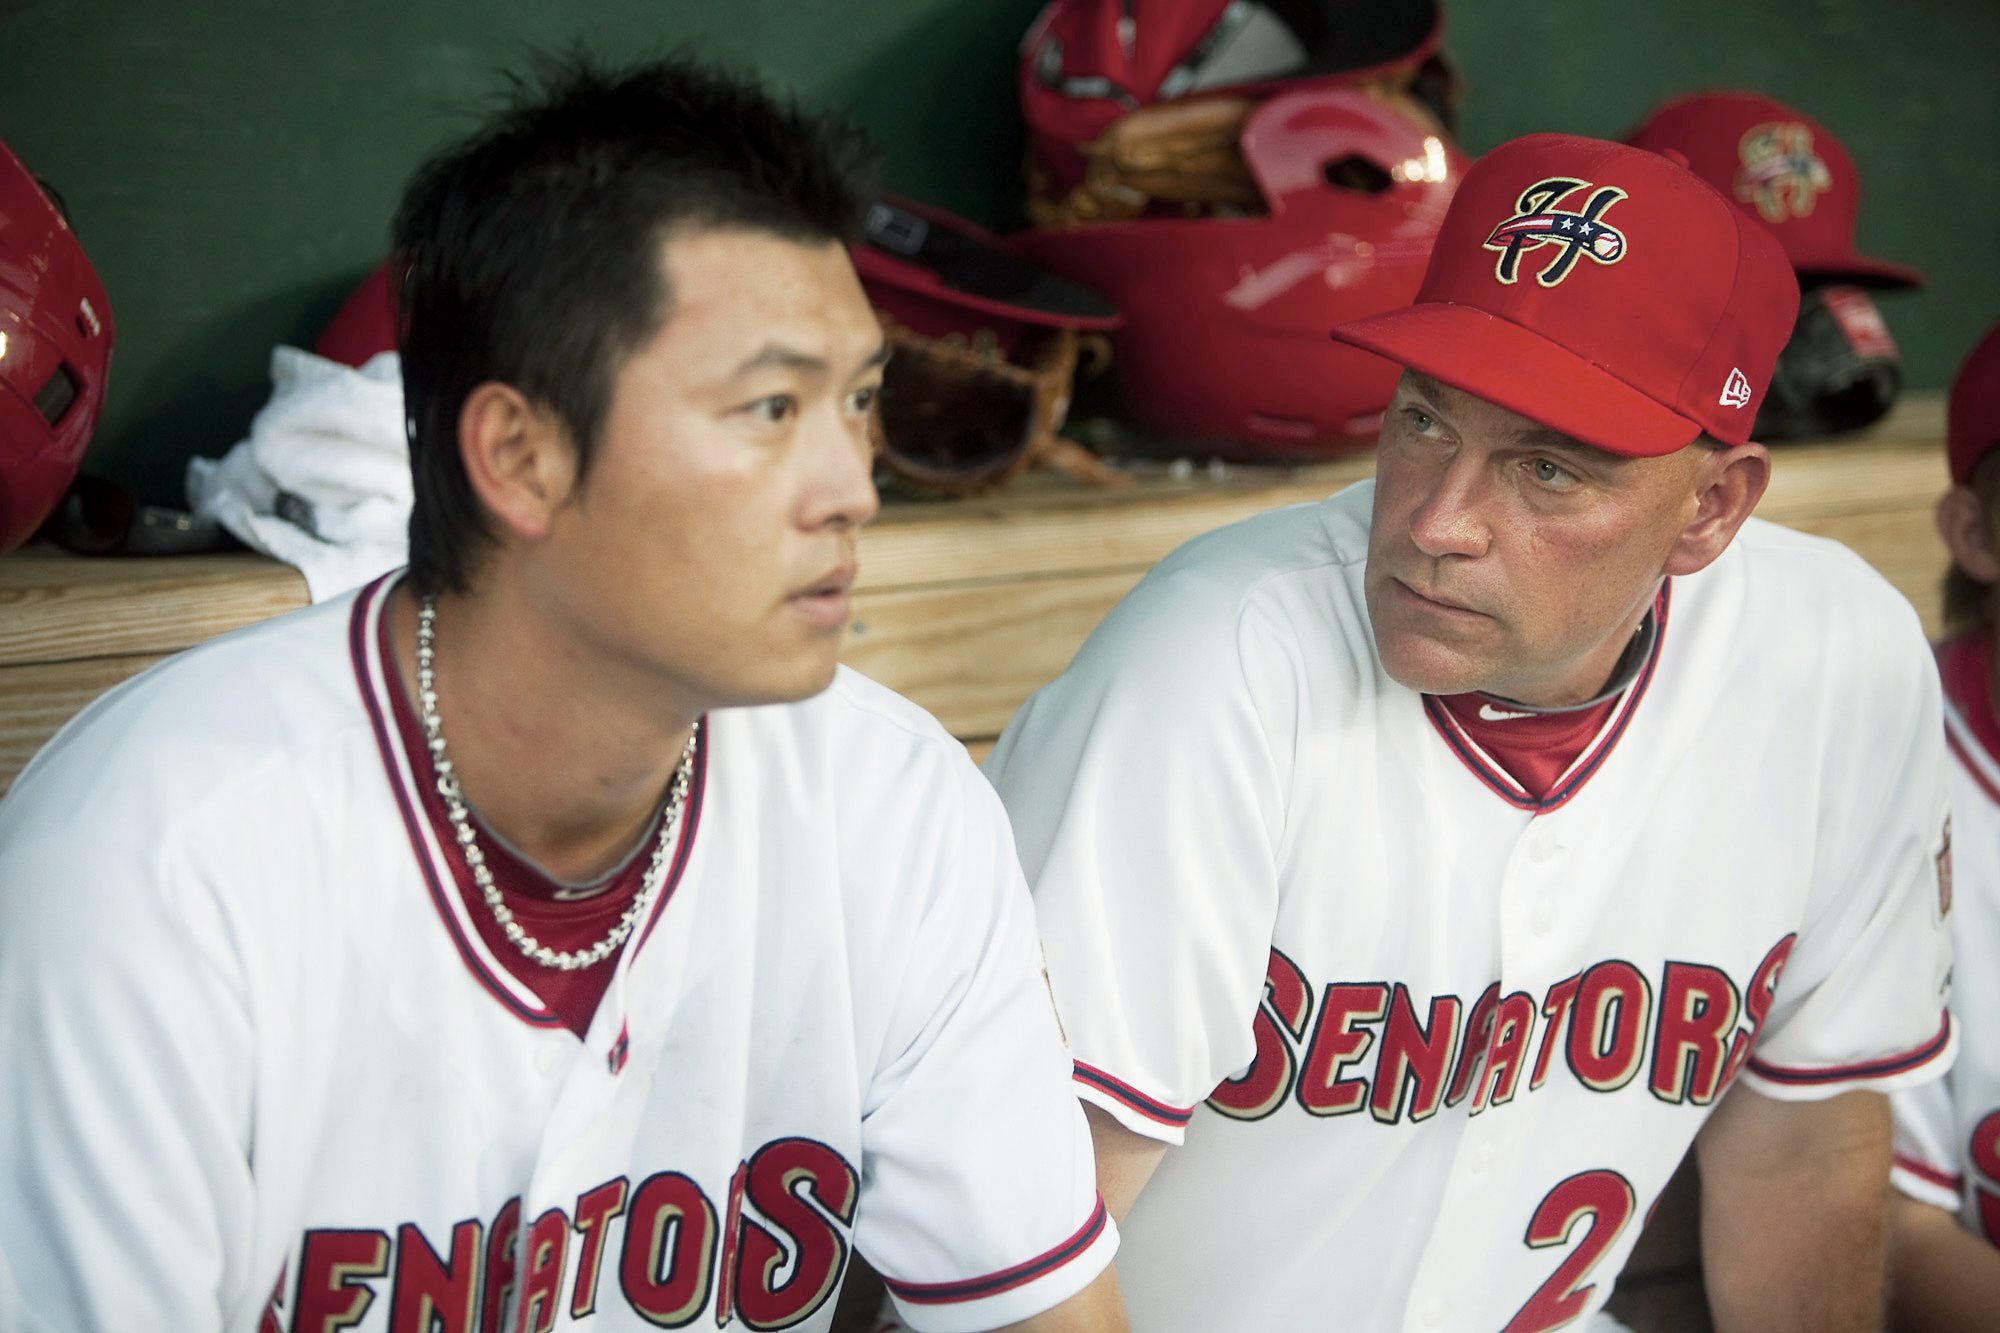 Former Nats Pitcher Chien-Ming Wang Reflects on Journey Back to